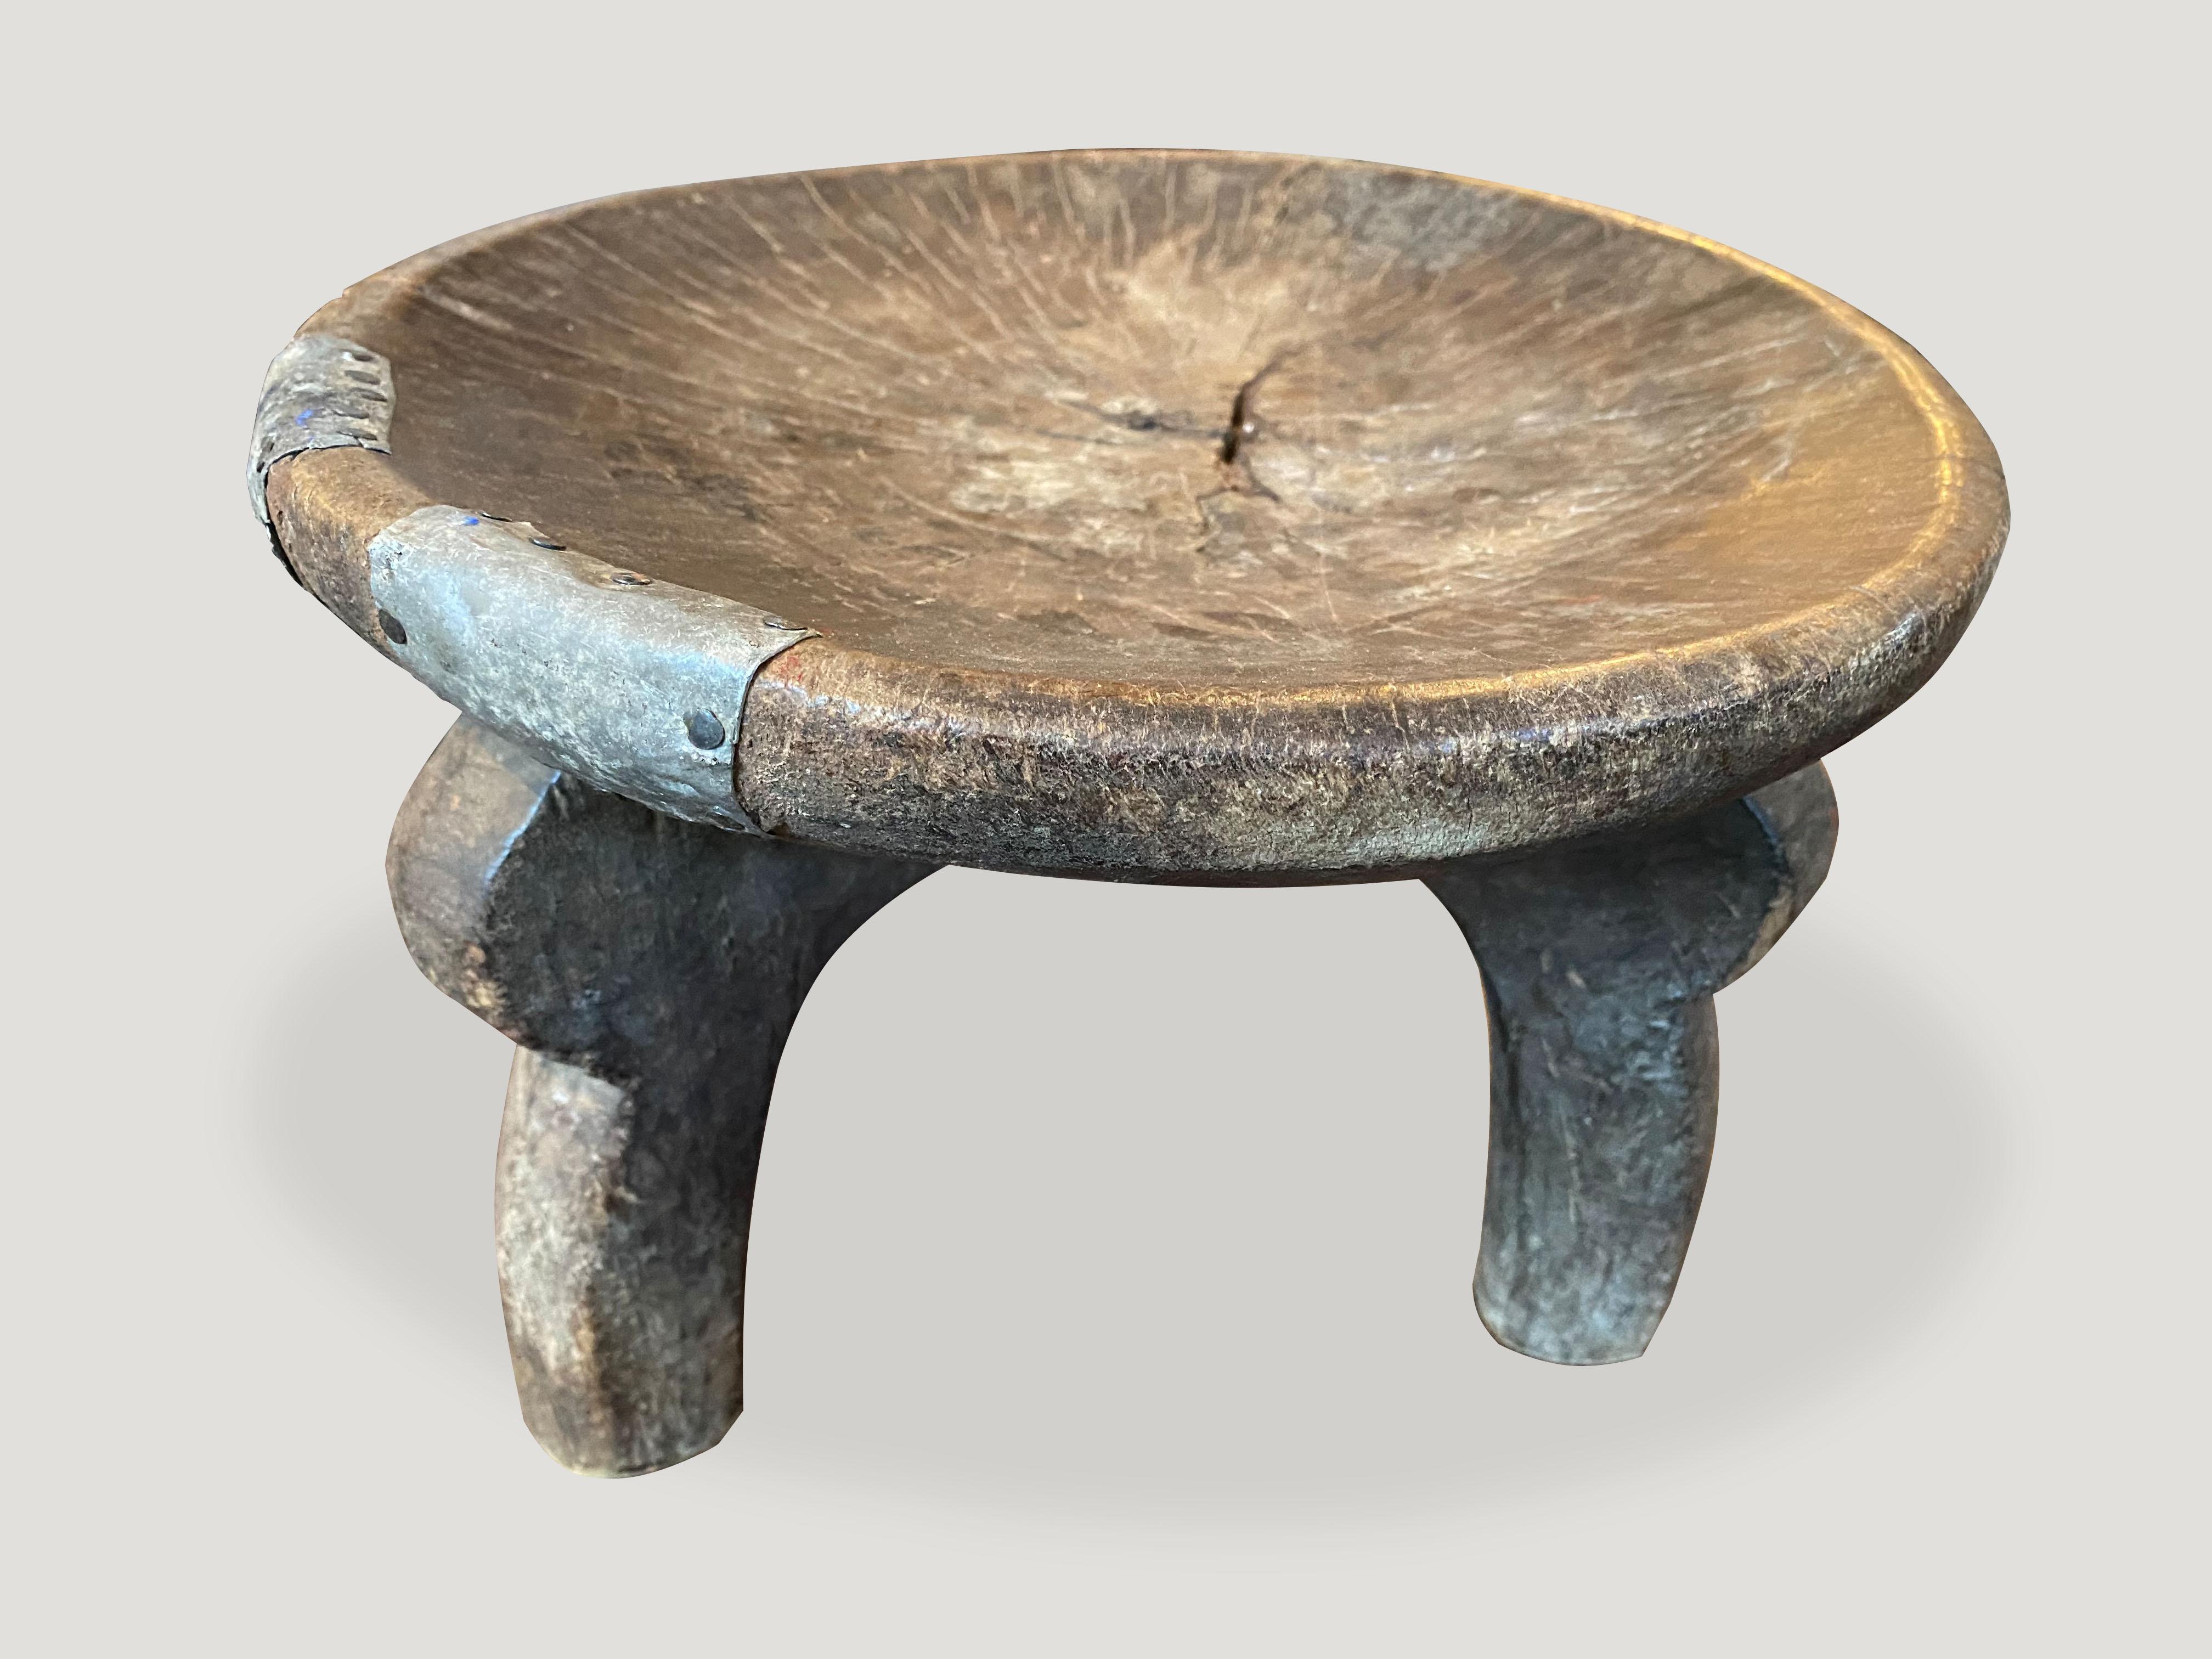 Andrianna Shamaris Antique African Stool, Side Table or Bowl In Excellent Condition For Sale In New York, NY